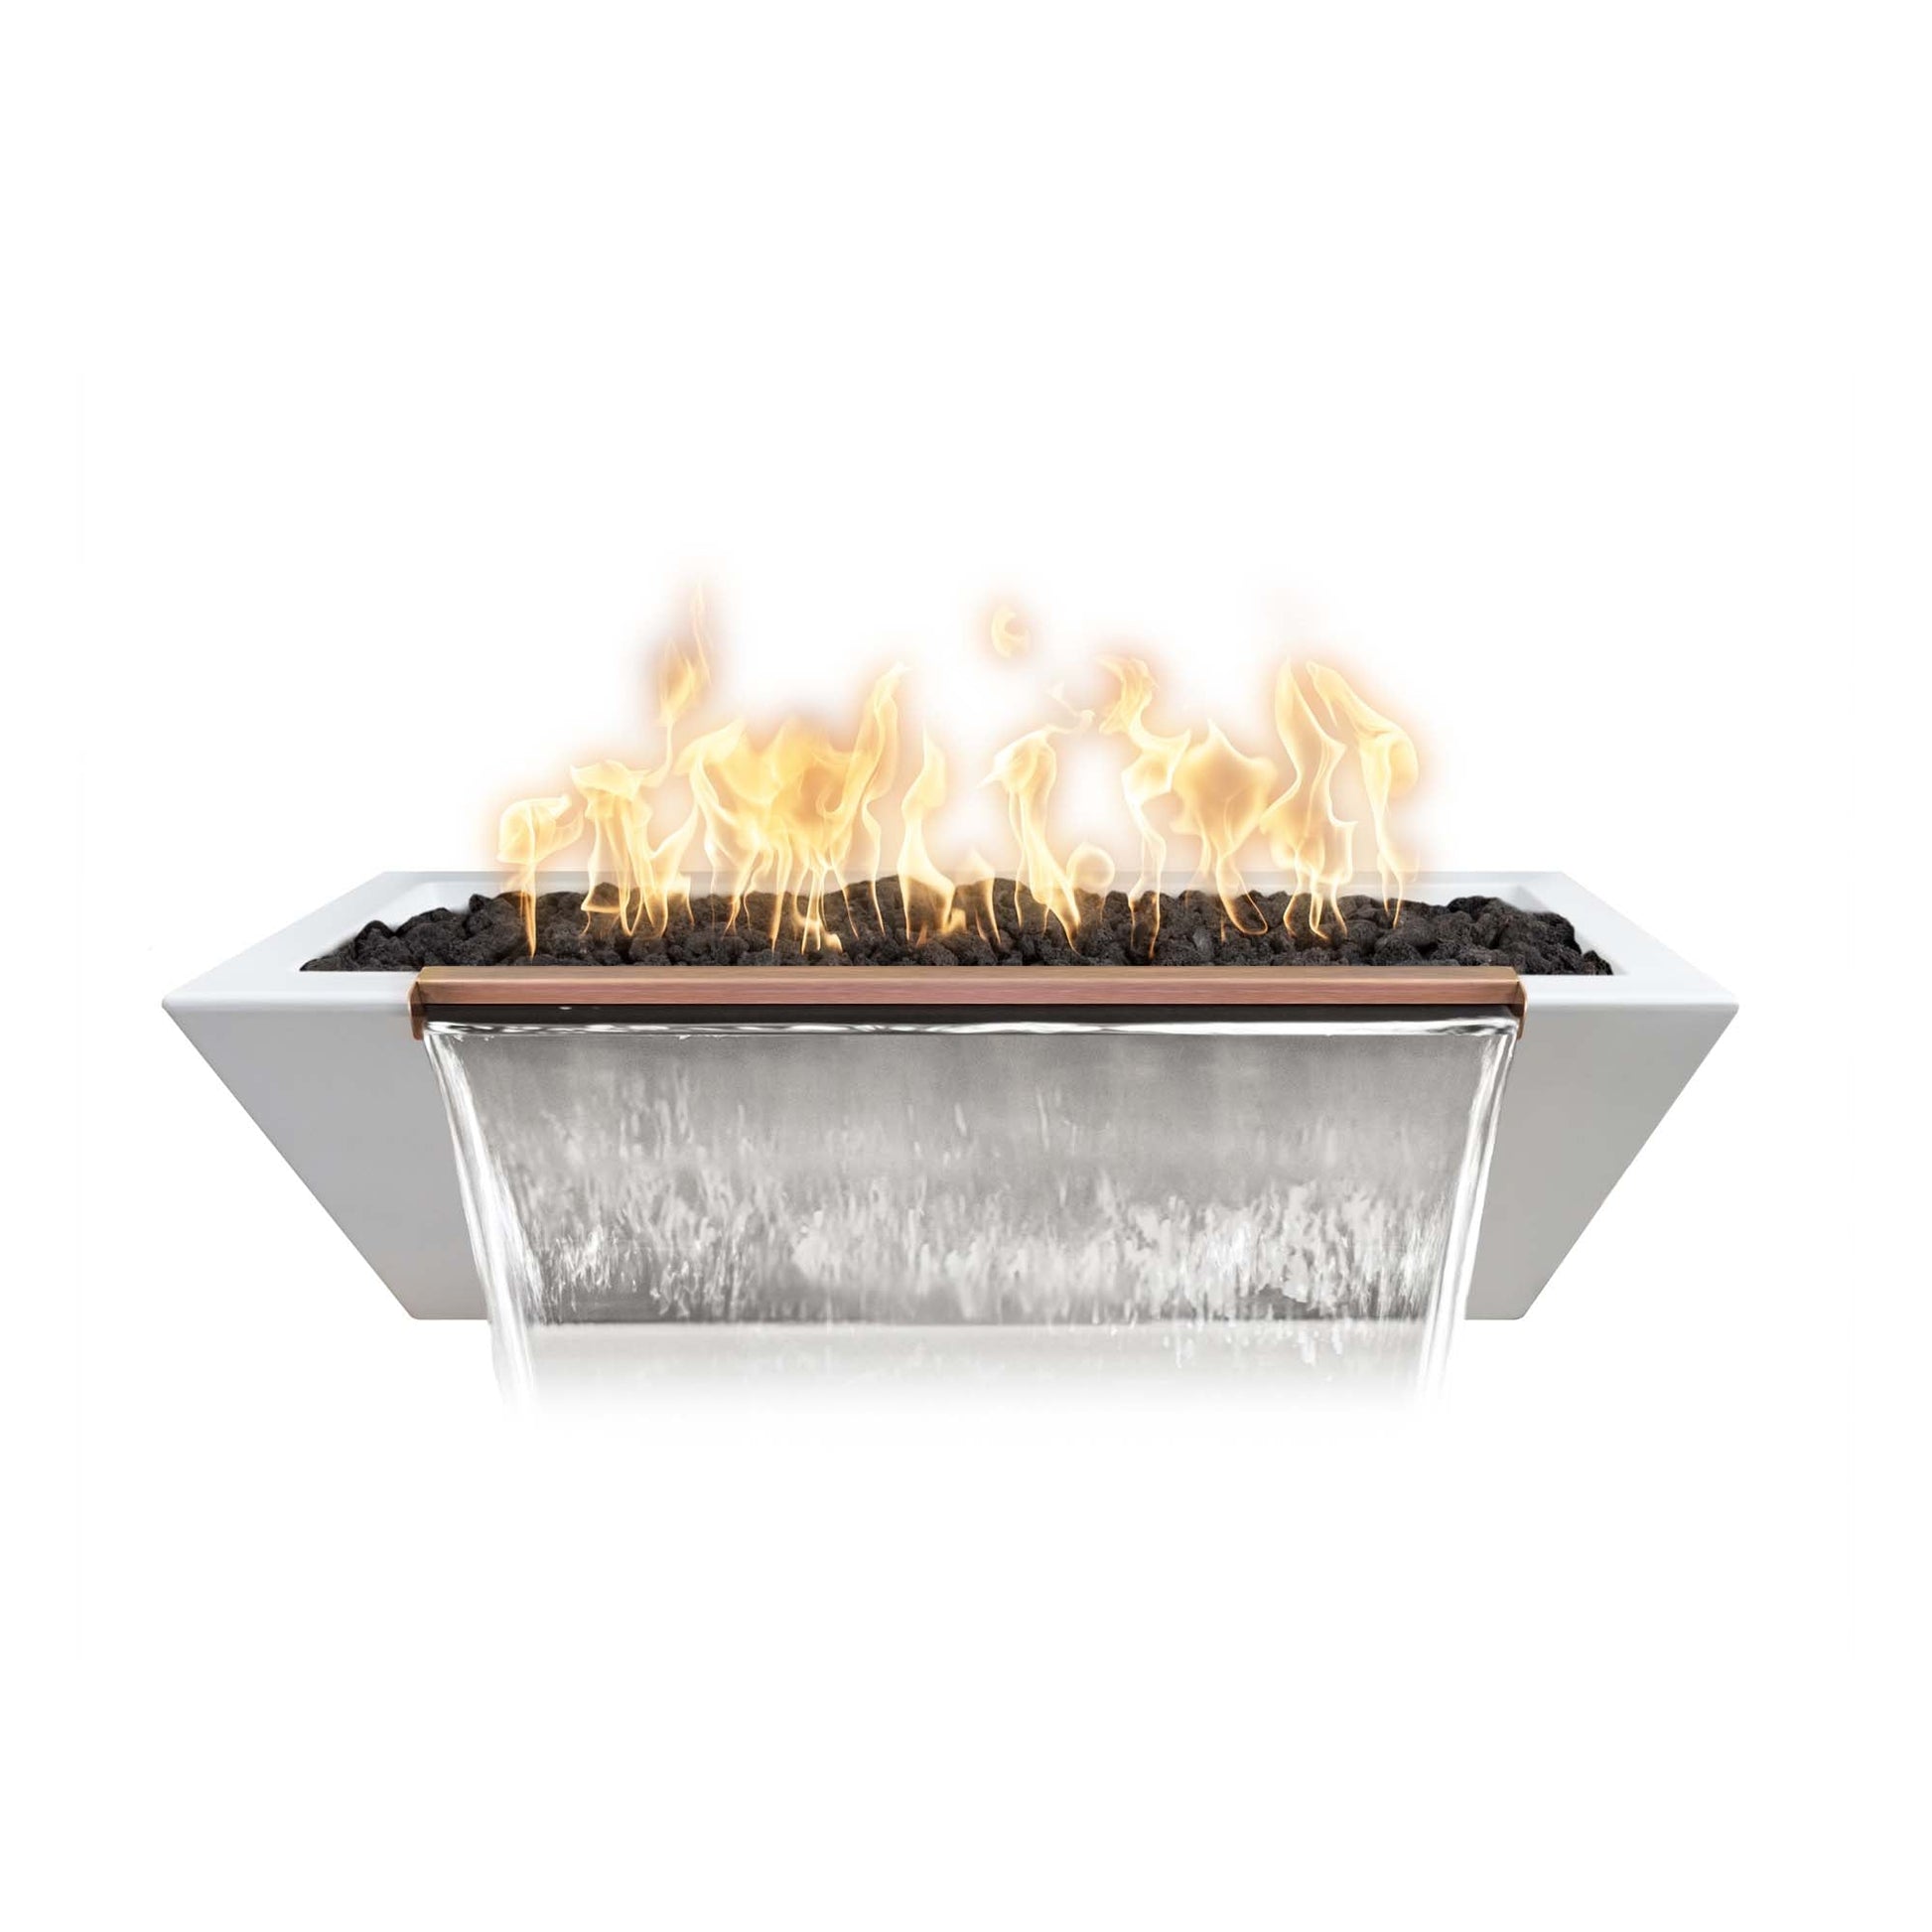 The Outdoor Plus Linear Maya 60" Chestnut GFRC Concrete Liquid Propane Fire & Water Bowl with 12V Electronic Ignition